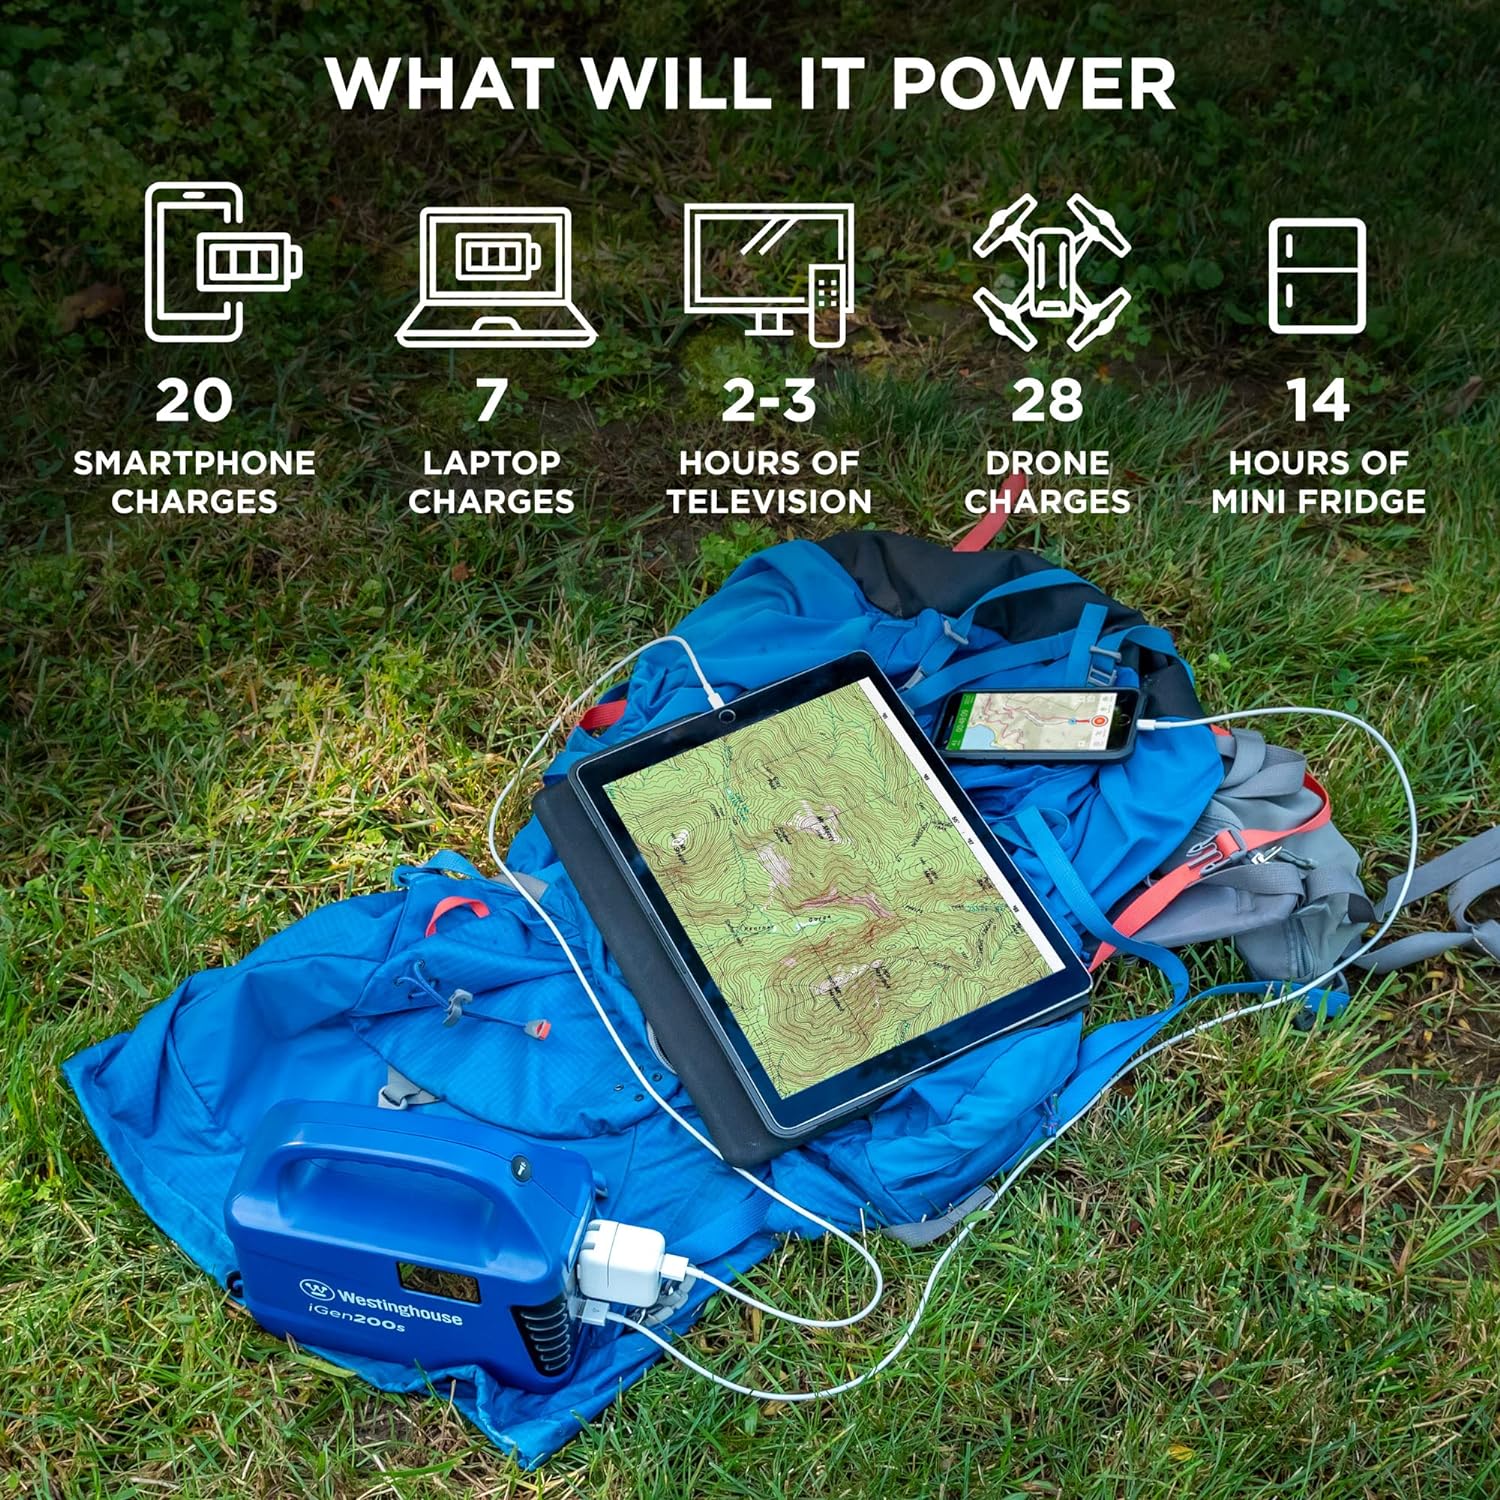 Westinghouse 155Wh 150 Peak Watt Portable Power Station and Solar Generator, Pure Sine Wave AC Outlet, Backup Lithium Battery for Camping, Home, Travel, Indoor/Outdoor Use (Solar Panel Not Included) - Westinghouse 155Wh Portable Power Station Review